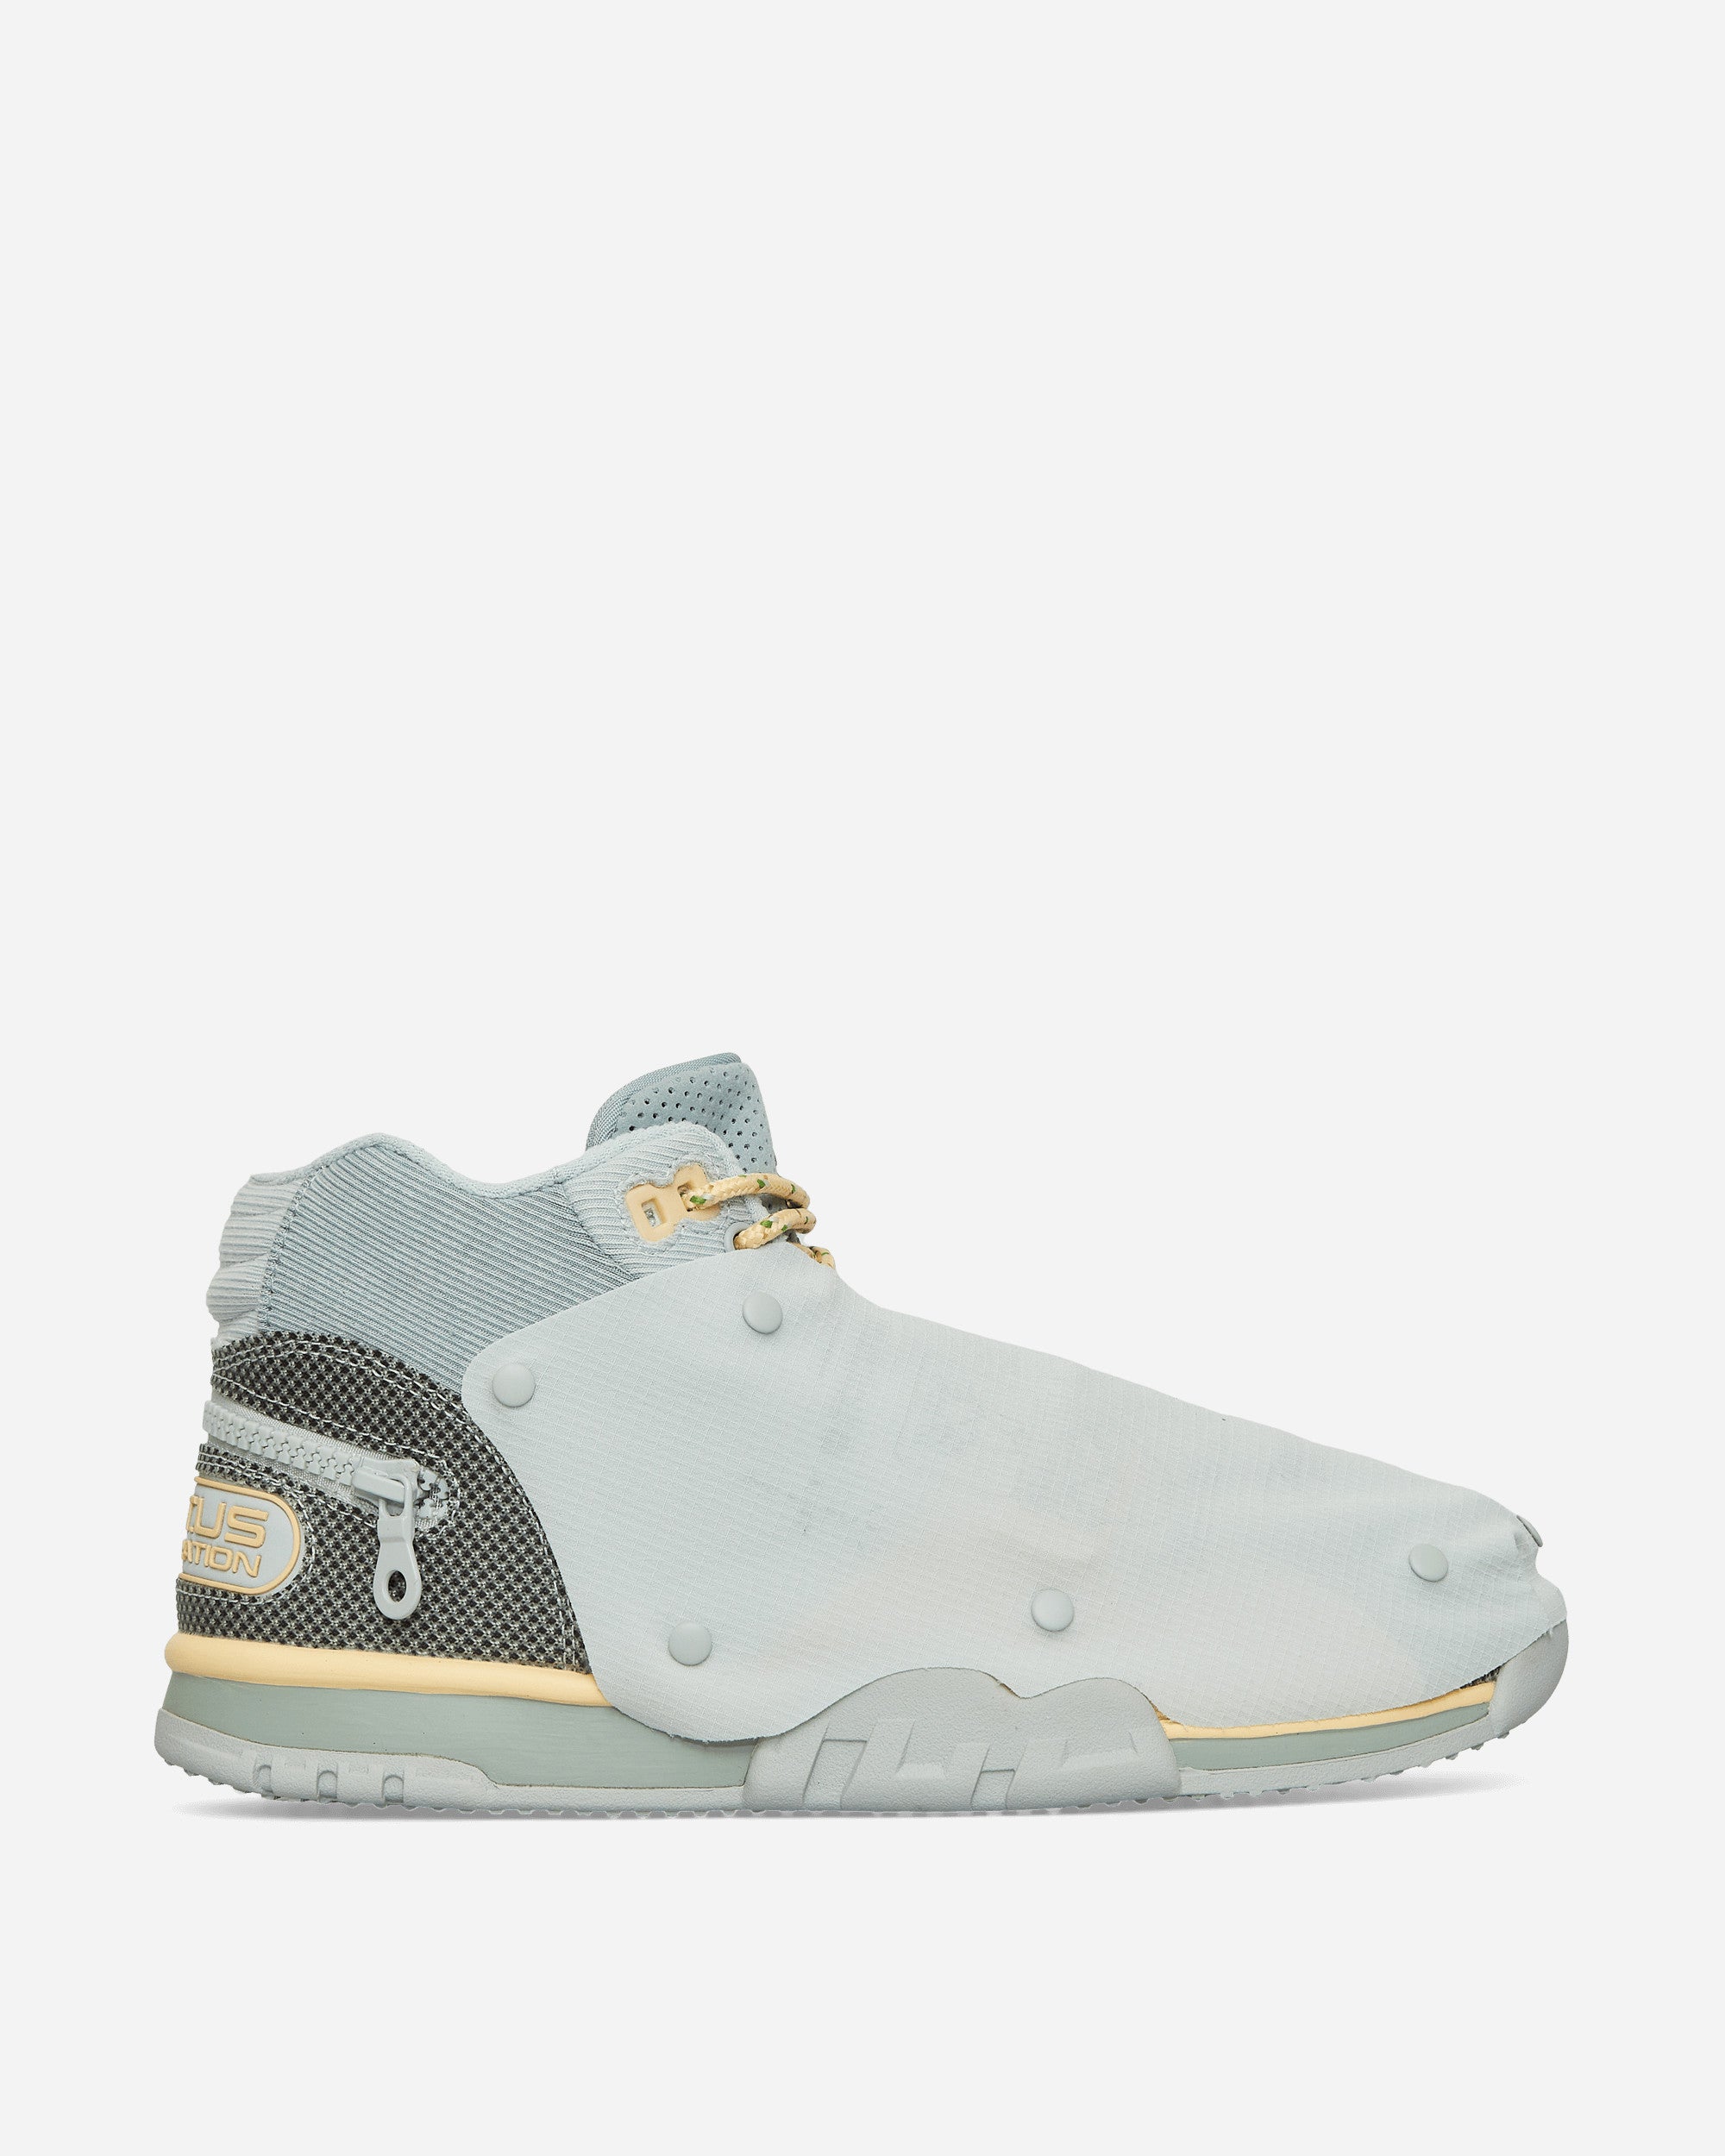 CACT.US CORP Air Trainer 1 Sneakers Grey Haze